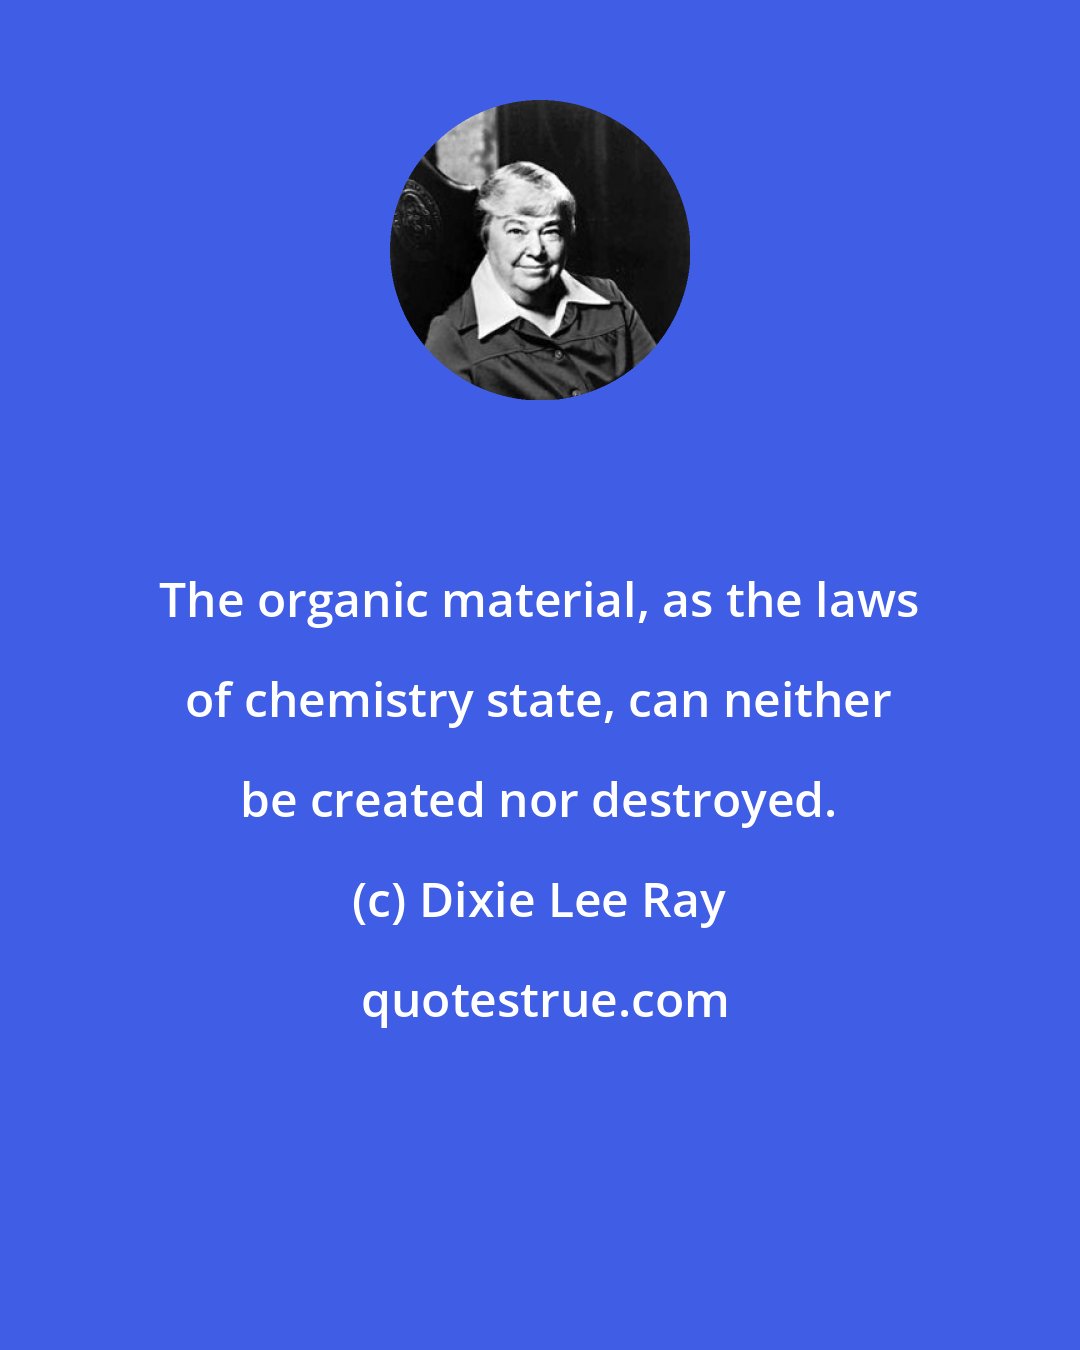 Dixie Lee Ray: The organic material, as the laws of chemistry state, can neither be created nor destroyed.